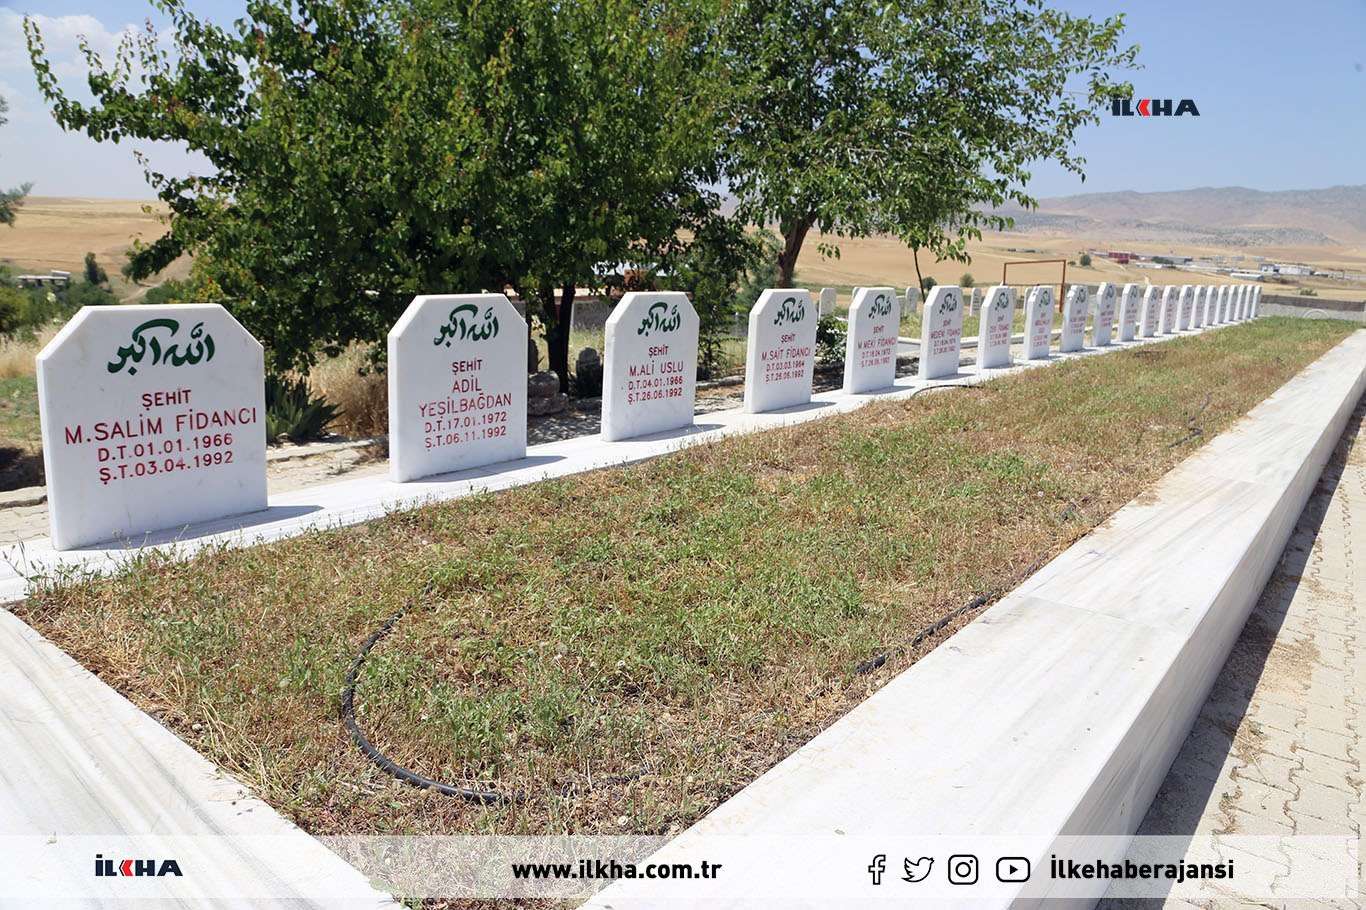 Susa martyrs to be commemorated today at the site of their grave